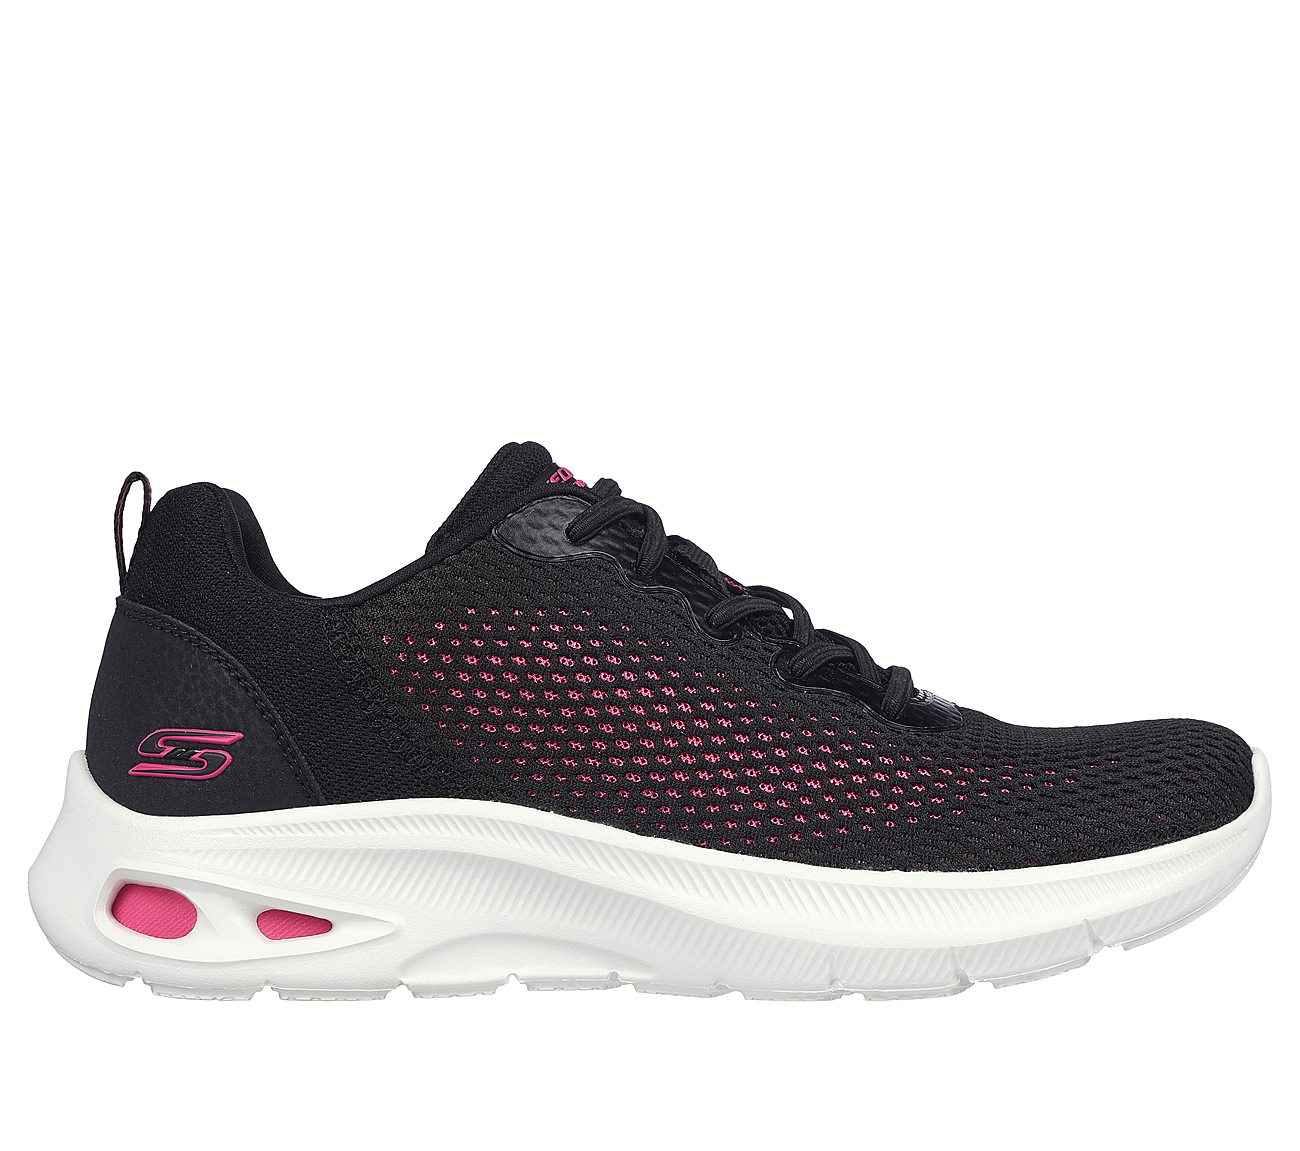 BOBS UNITY - HINT OF COLOR, BLACK/HOT PINK Footwear Lateral View